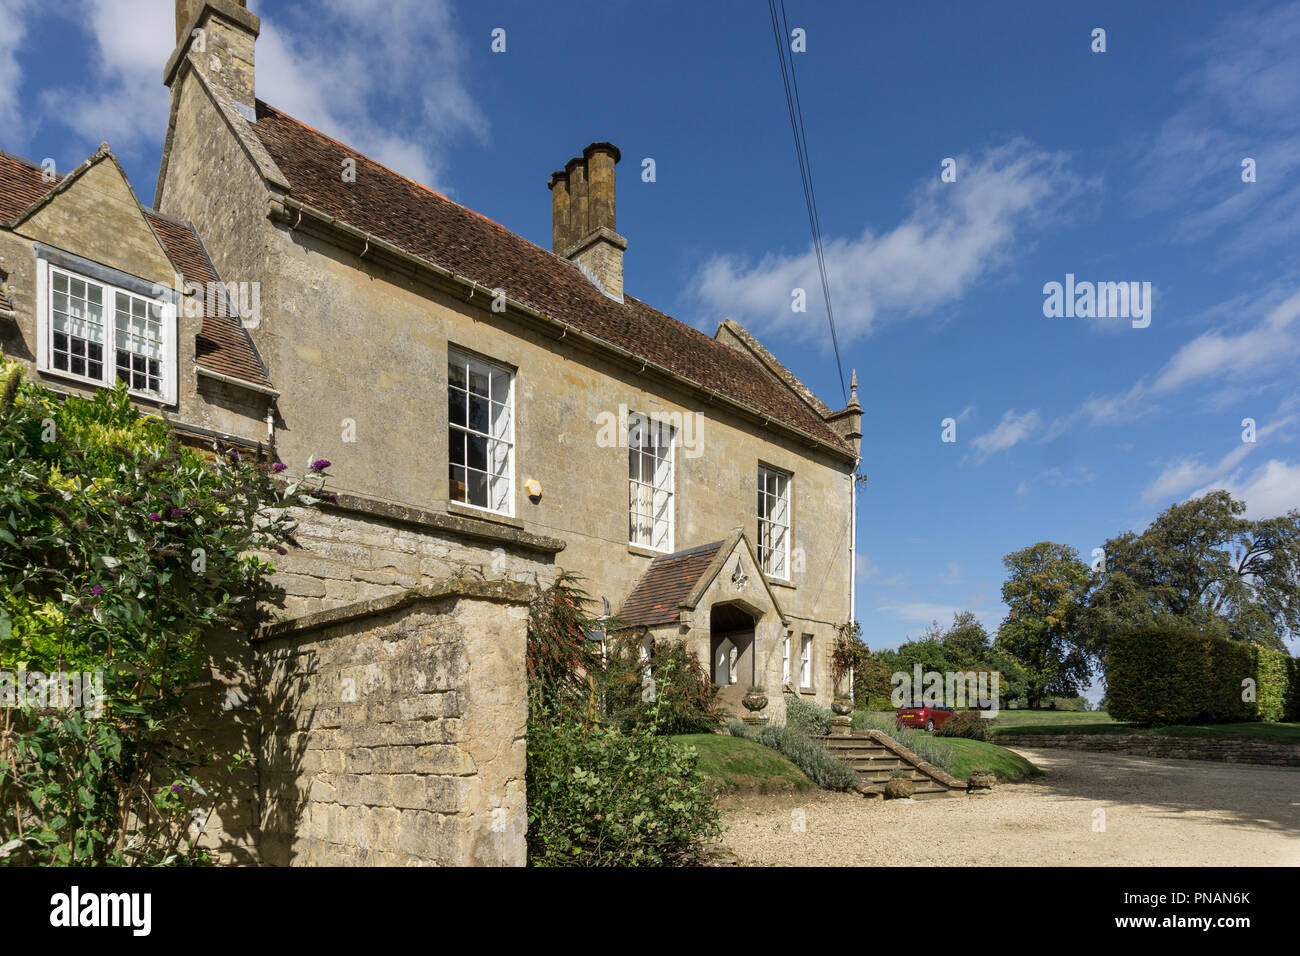 Weston Hall, a late 17th century house and home to the famous literary Sitwell family since 1714; Weston, Northamptonshire, UK Stock Photo